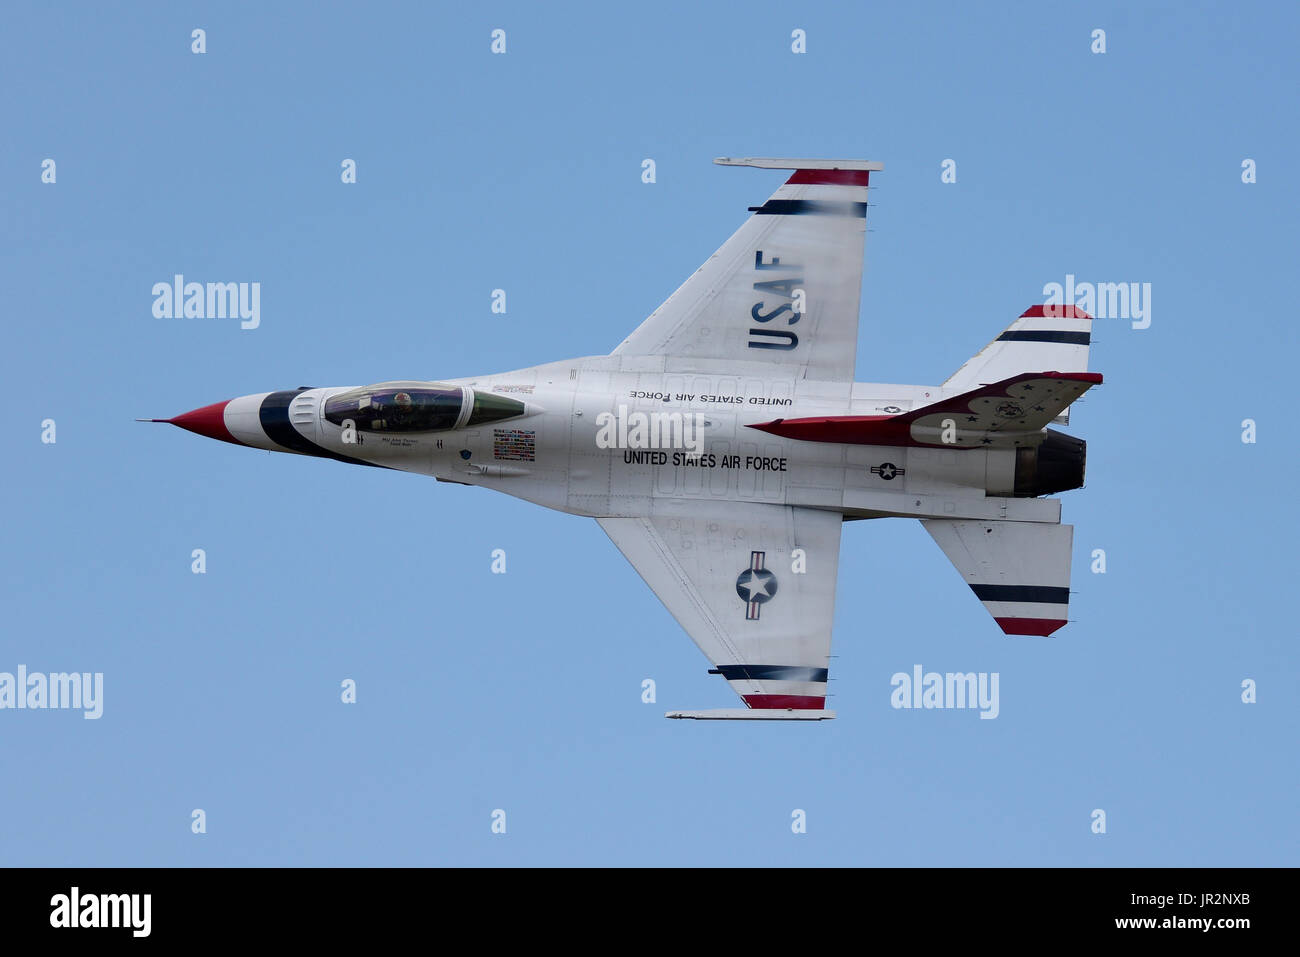 US Air Force Thunderbirds Air Demonstration Squadron display team jet plane at an airshow Stock Photo